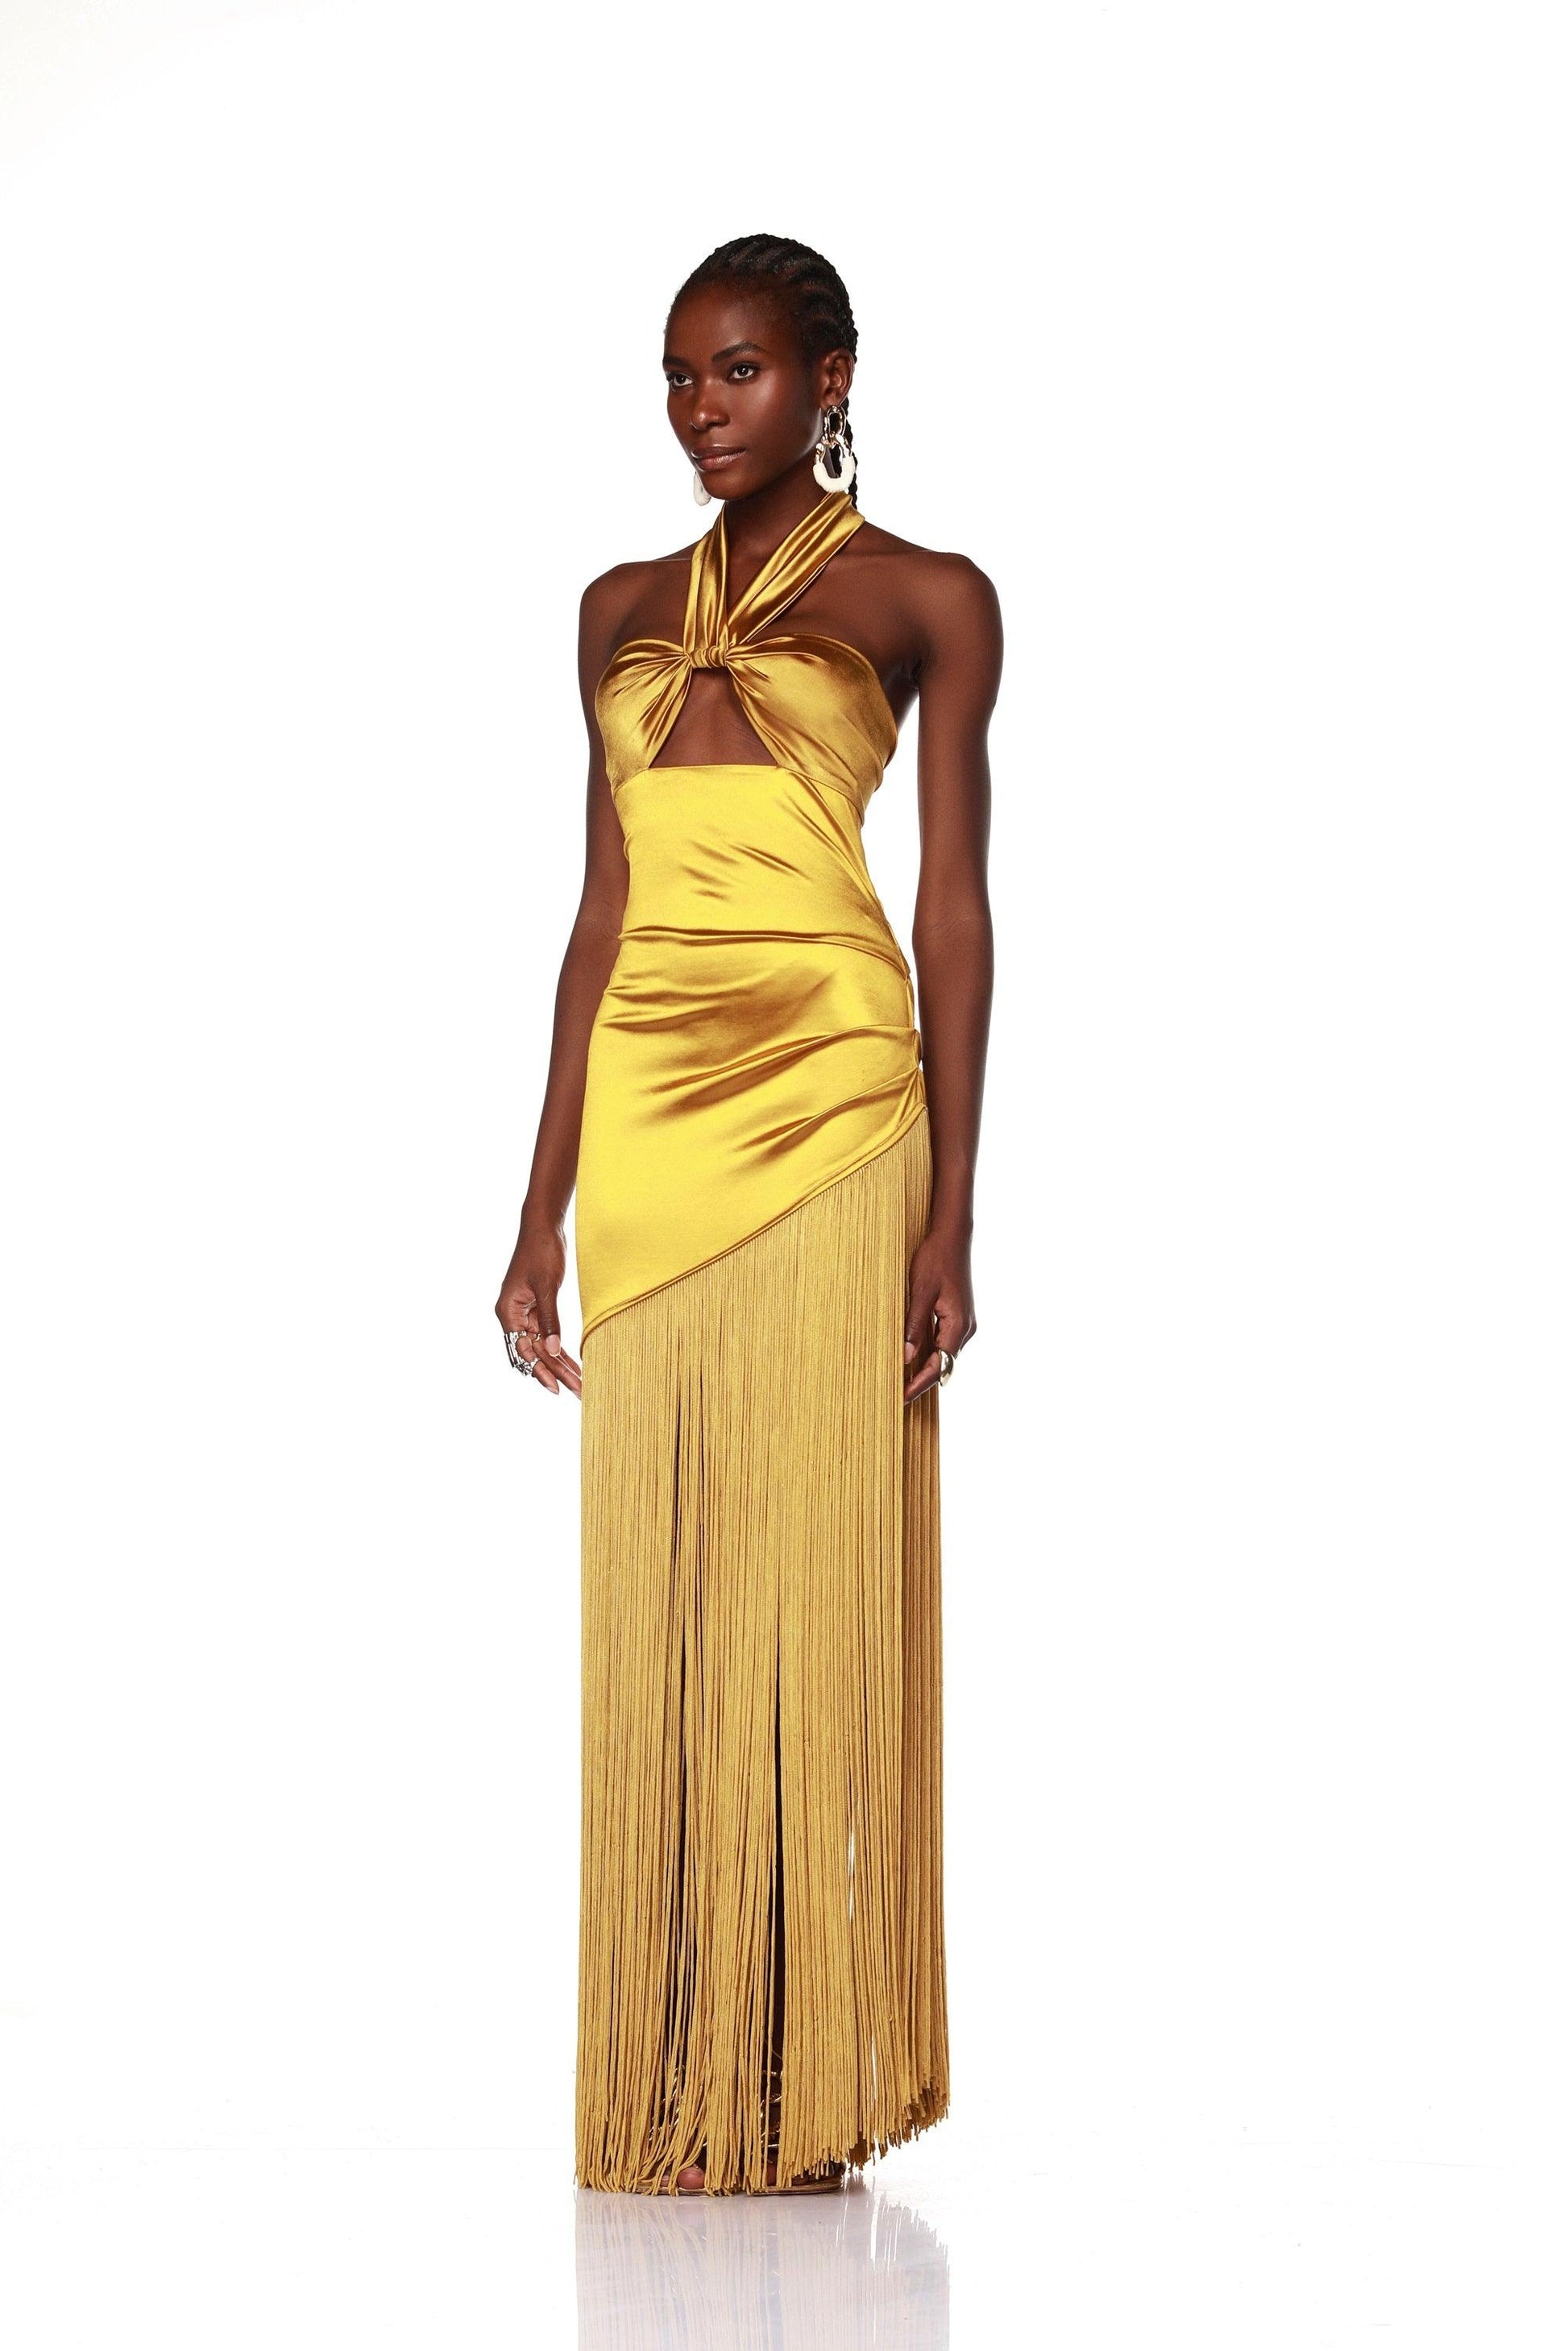 Bali Gold Gown - Pre Order - BRONX AND BANCO